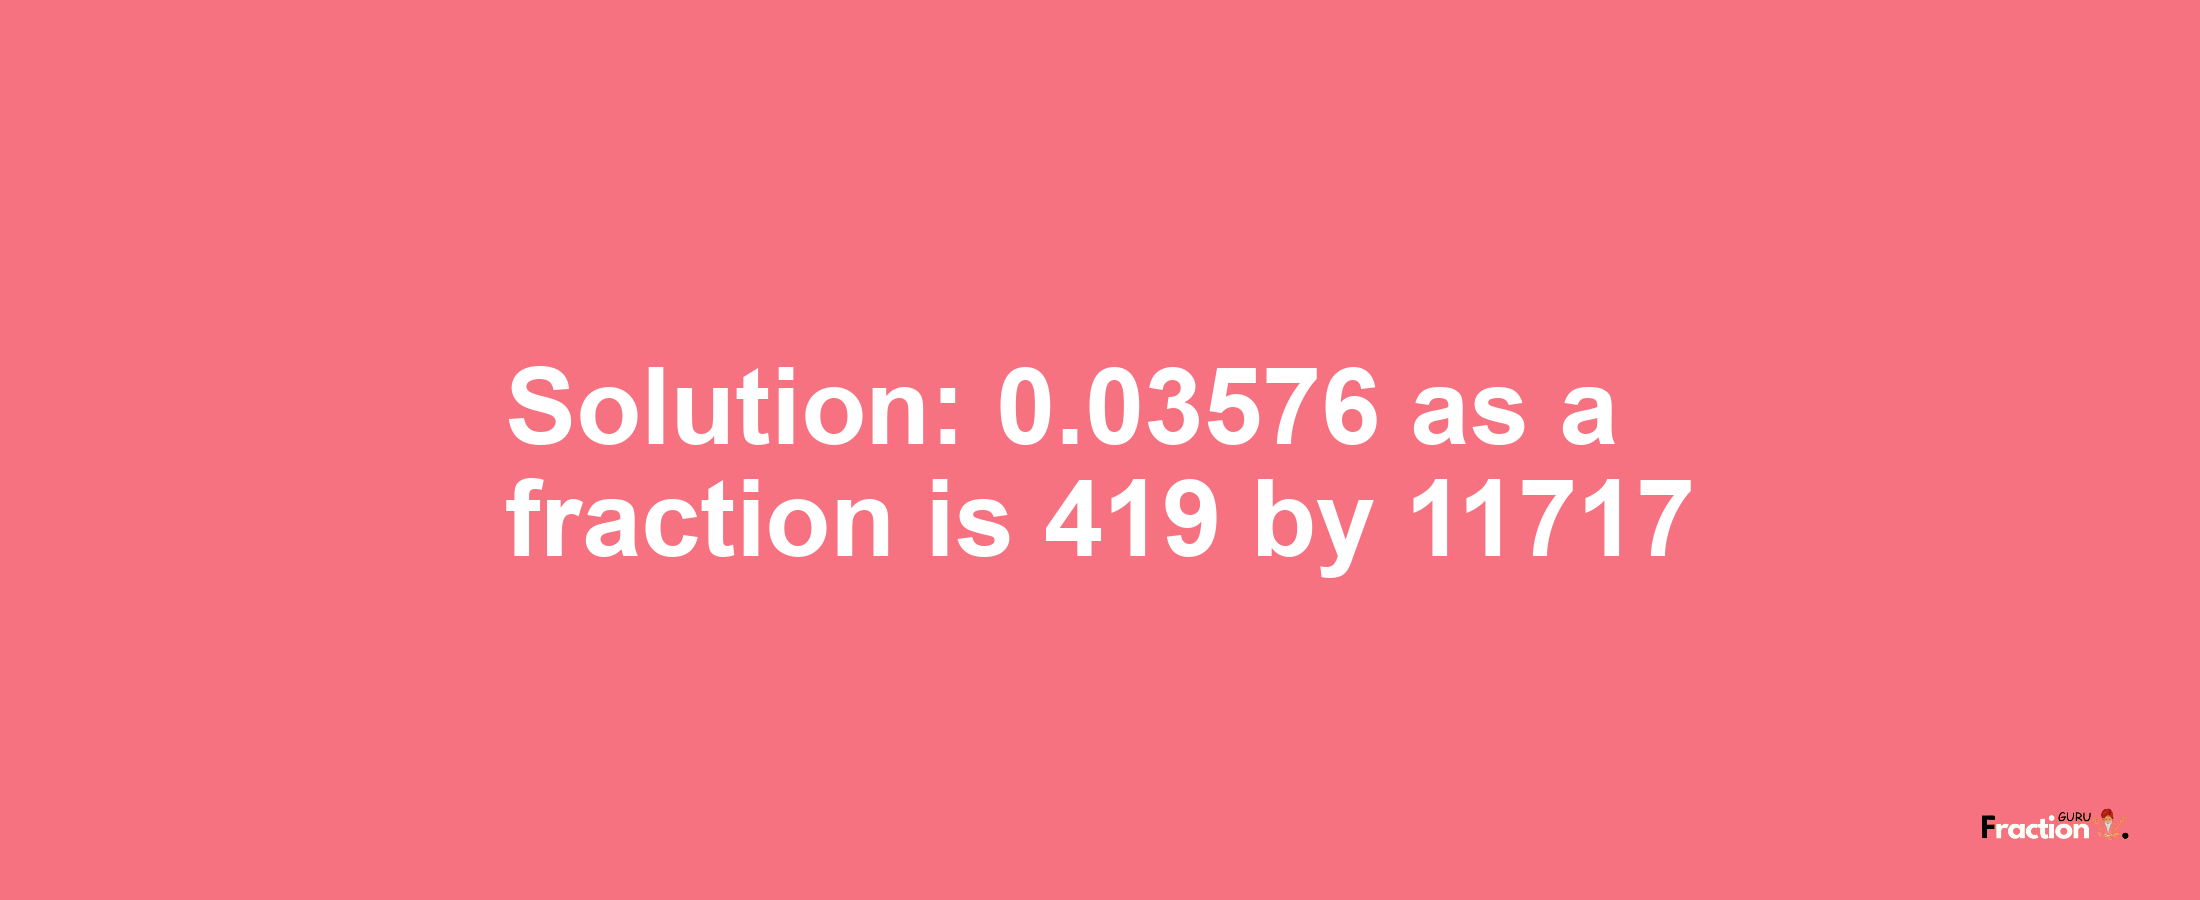 Solution:0.03576 as a fraction is 419/11717